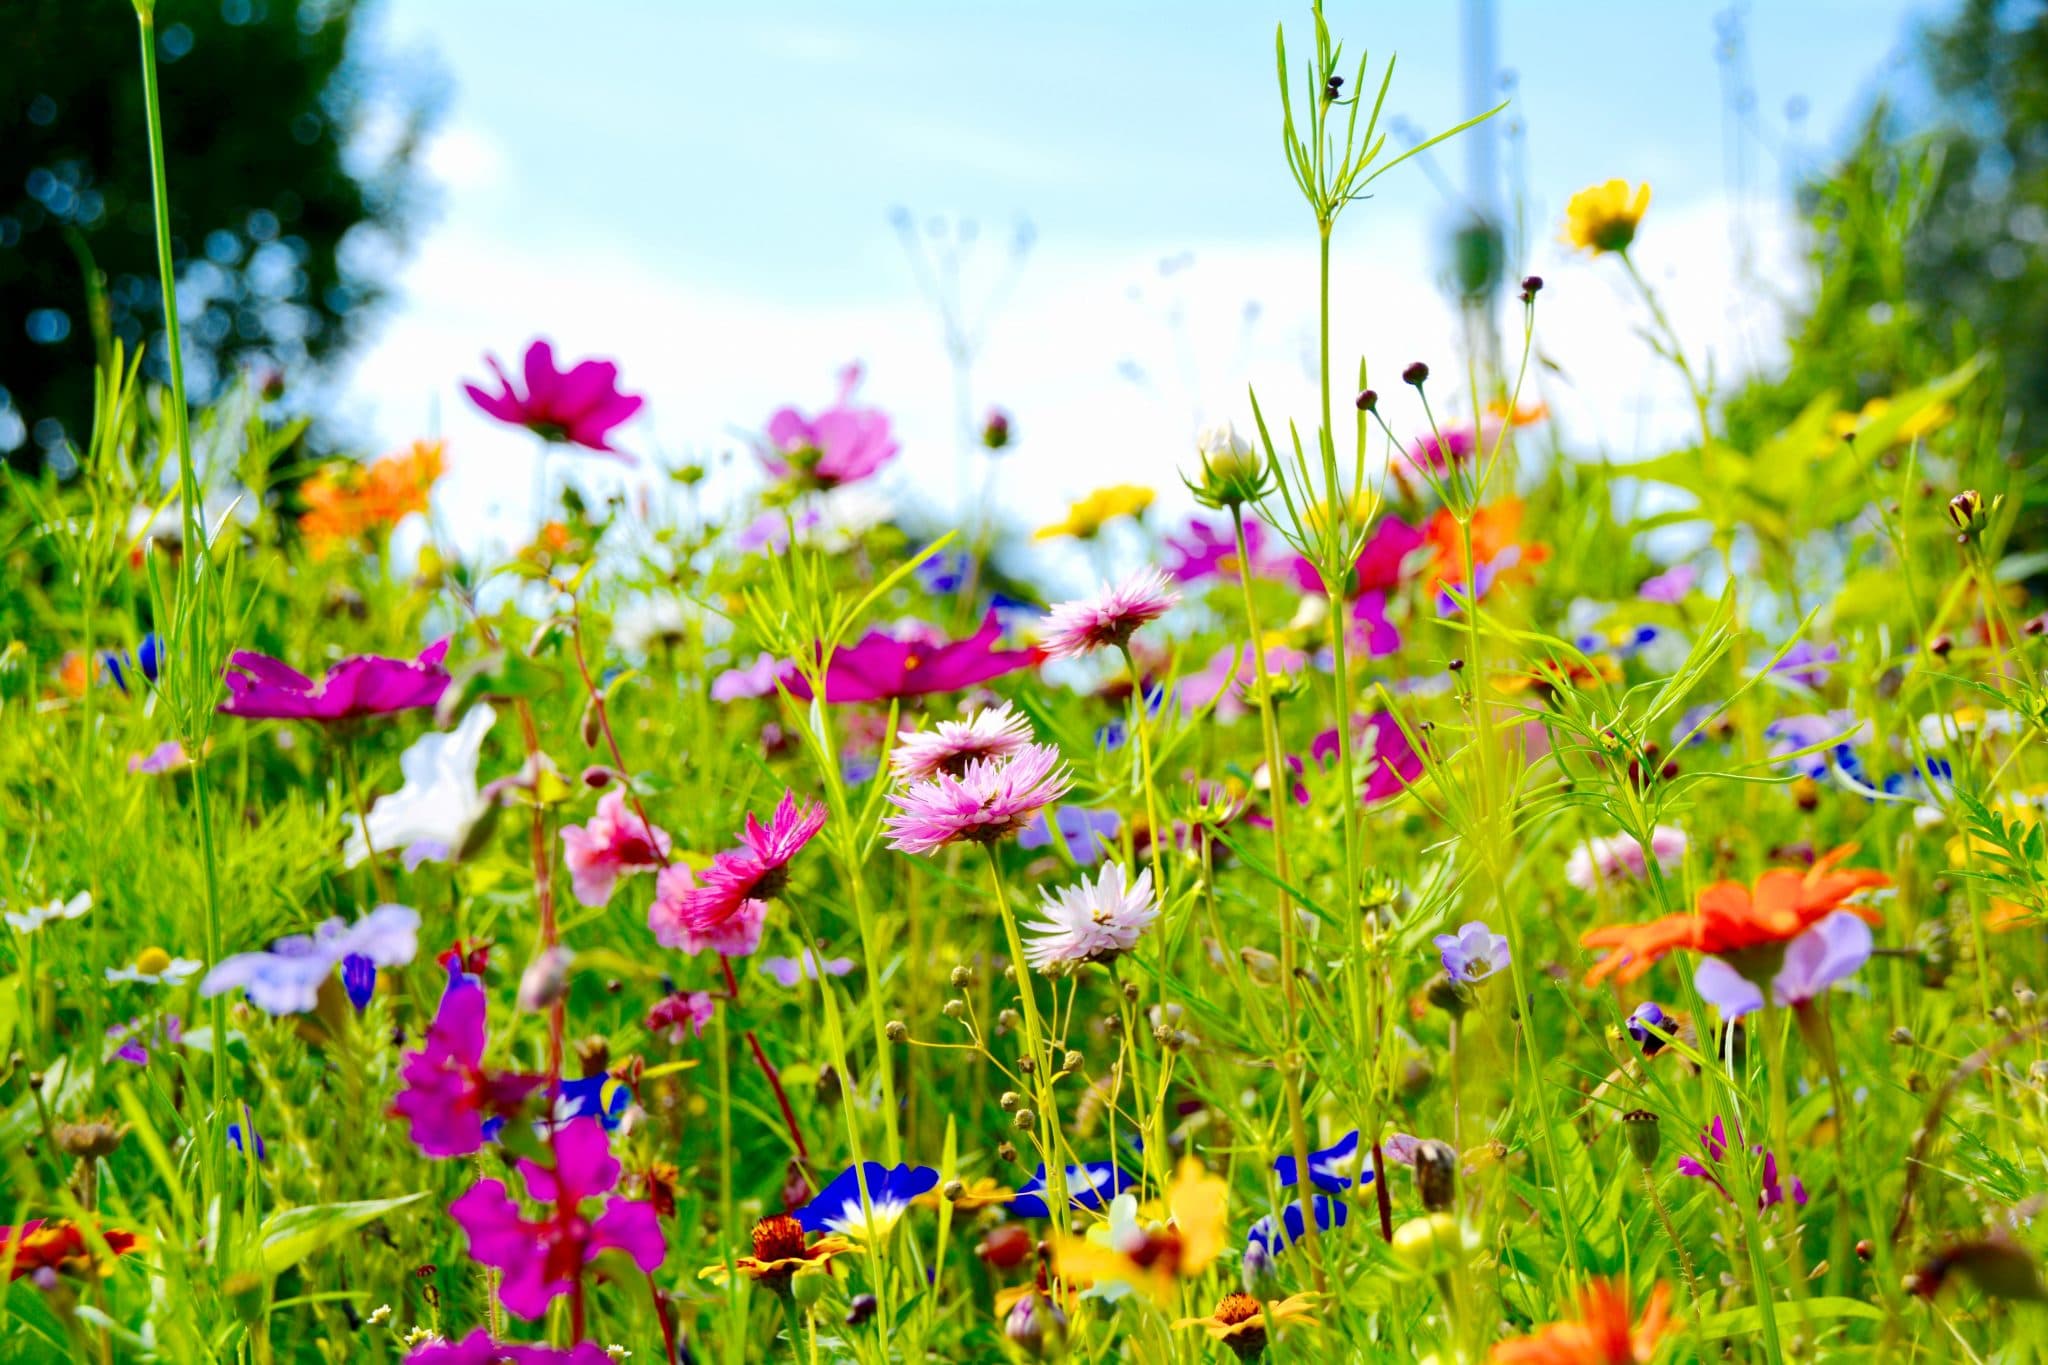 Creating a wildflower meadow - Cultivation Street